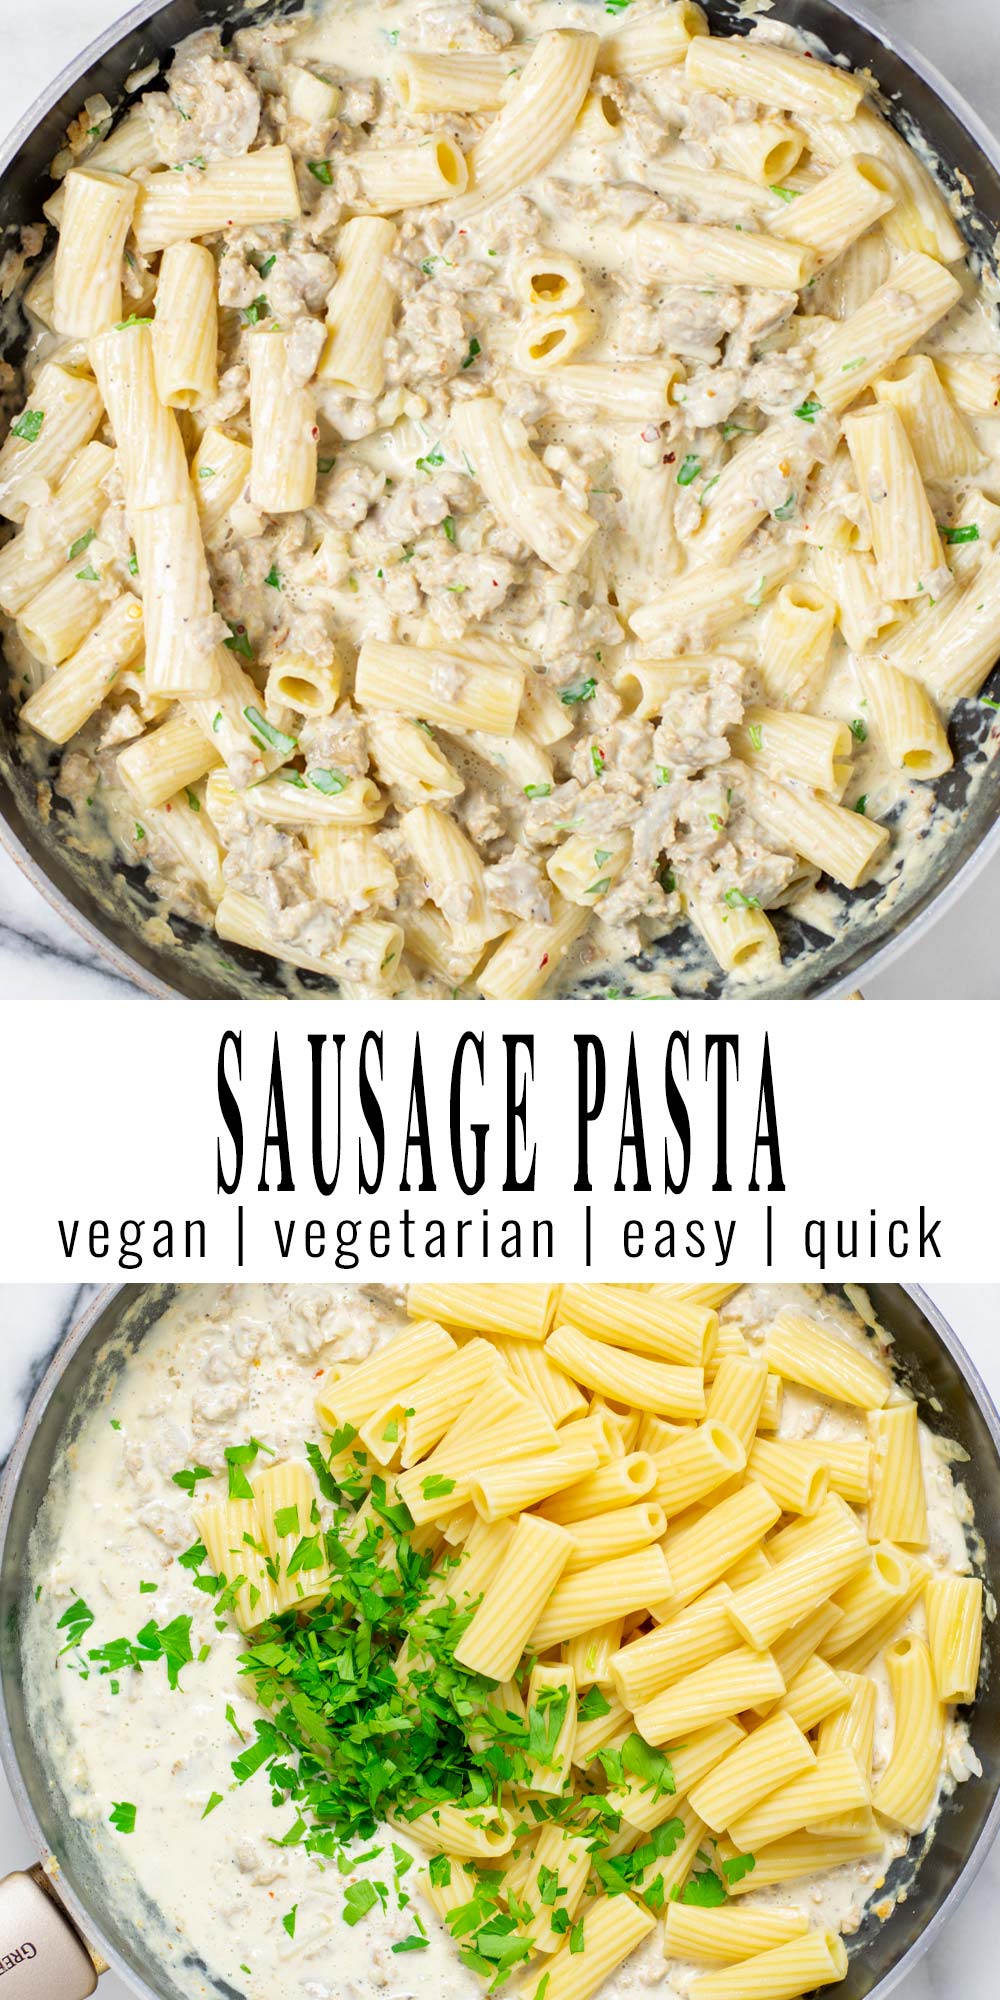 Collage of two pictures of the Sausage Pasta with recipe title text.